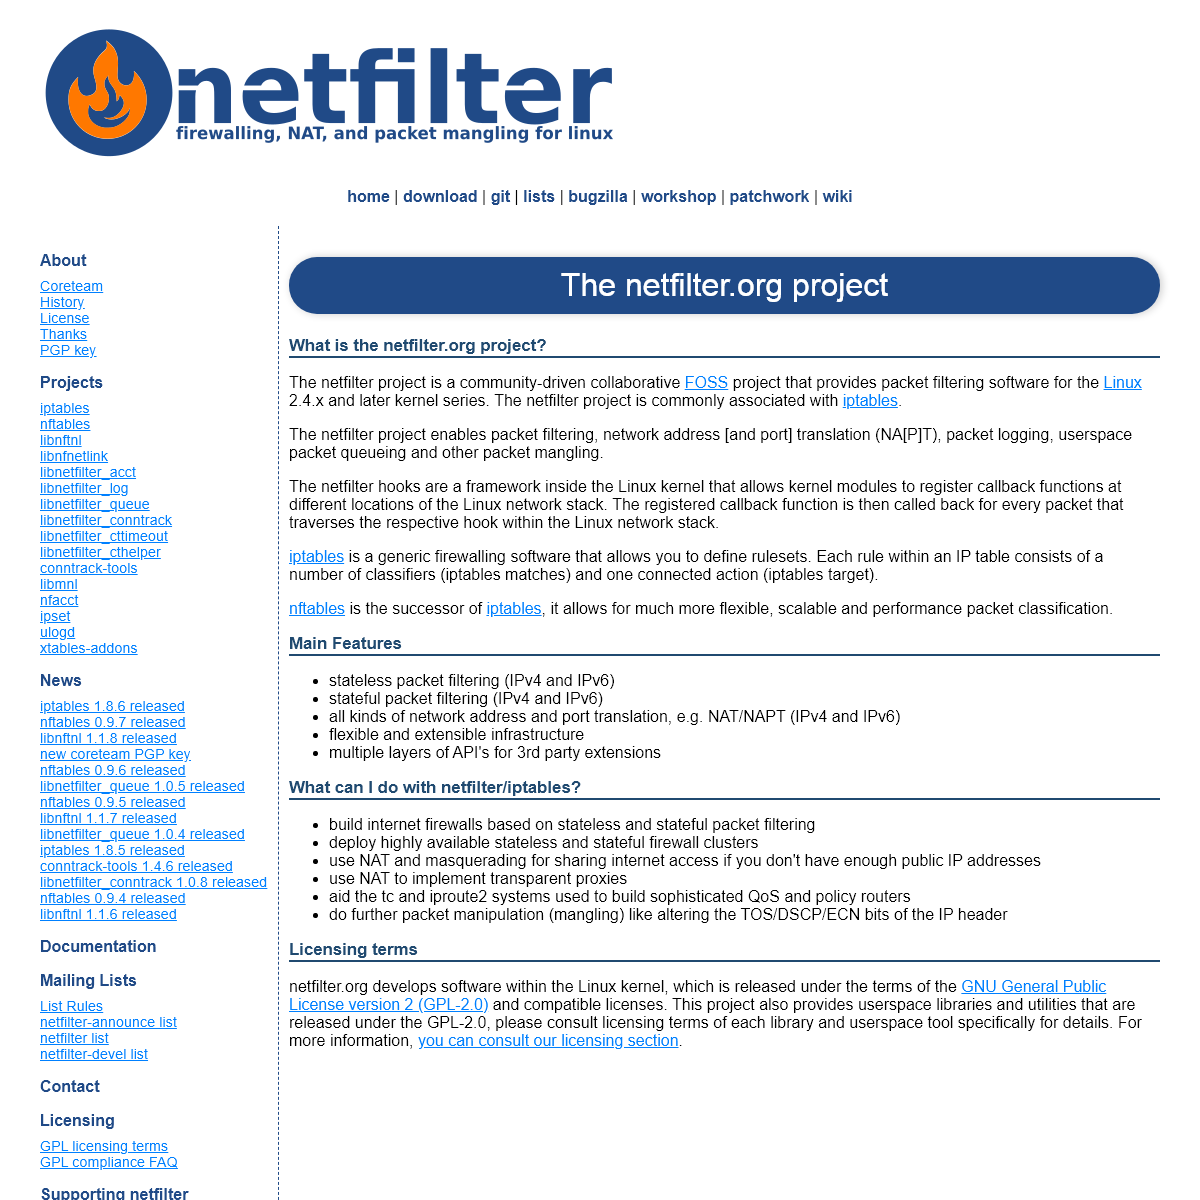 A complete backup of nftables.org